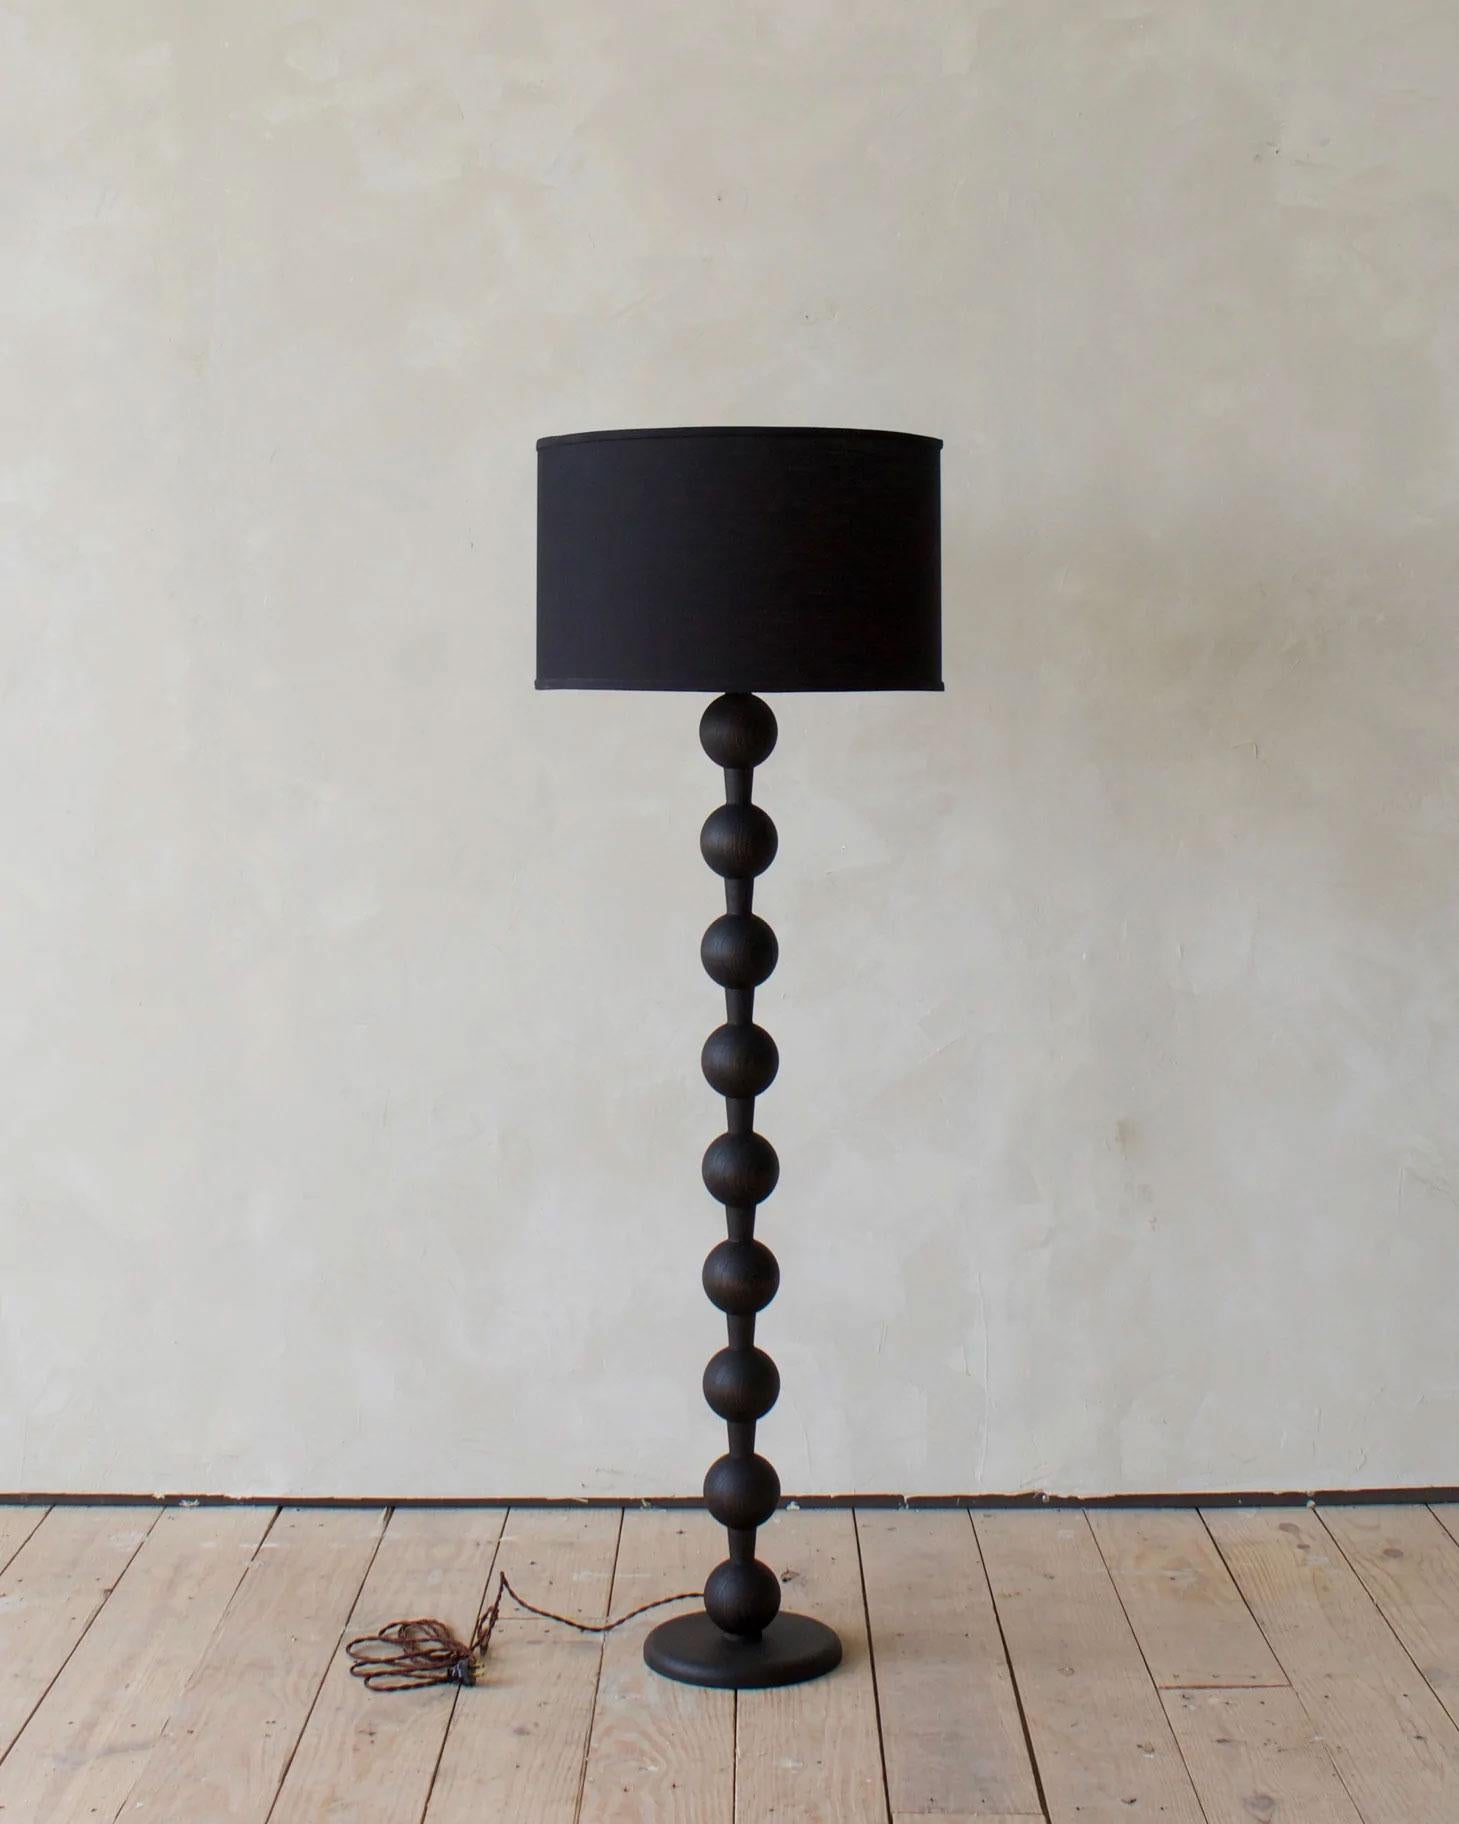 The charming sculptural design of the Hugo Barbell floor lamp is certain to add character to any room. Hand-crafted in Pennsylvania, the solid oak balls create a fixture that is as sturdy as it is stylish. The grained oak texture shows through the